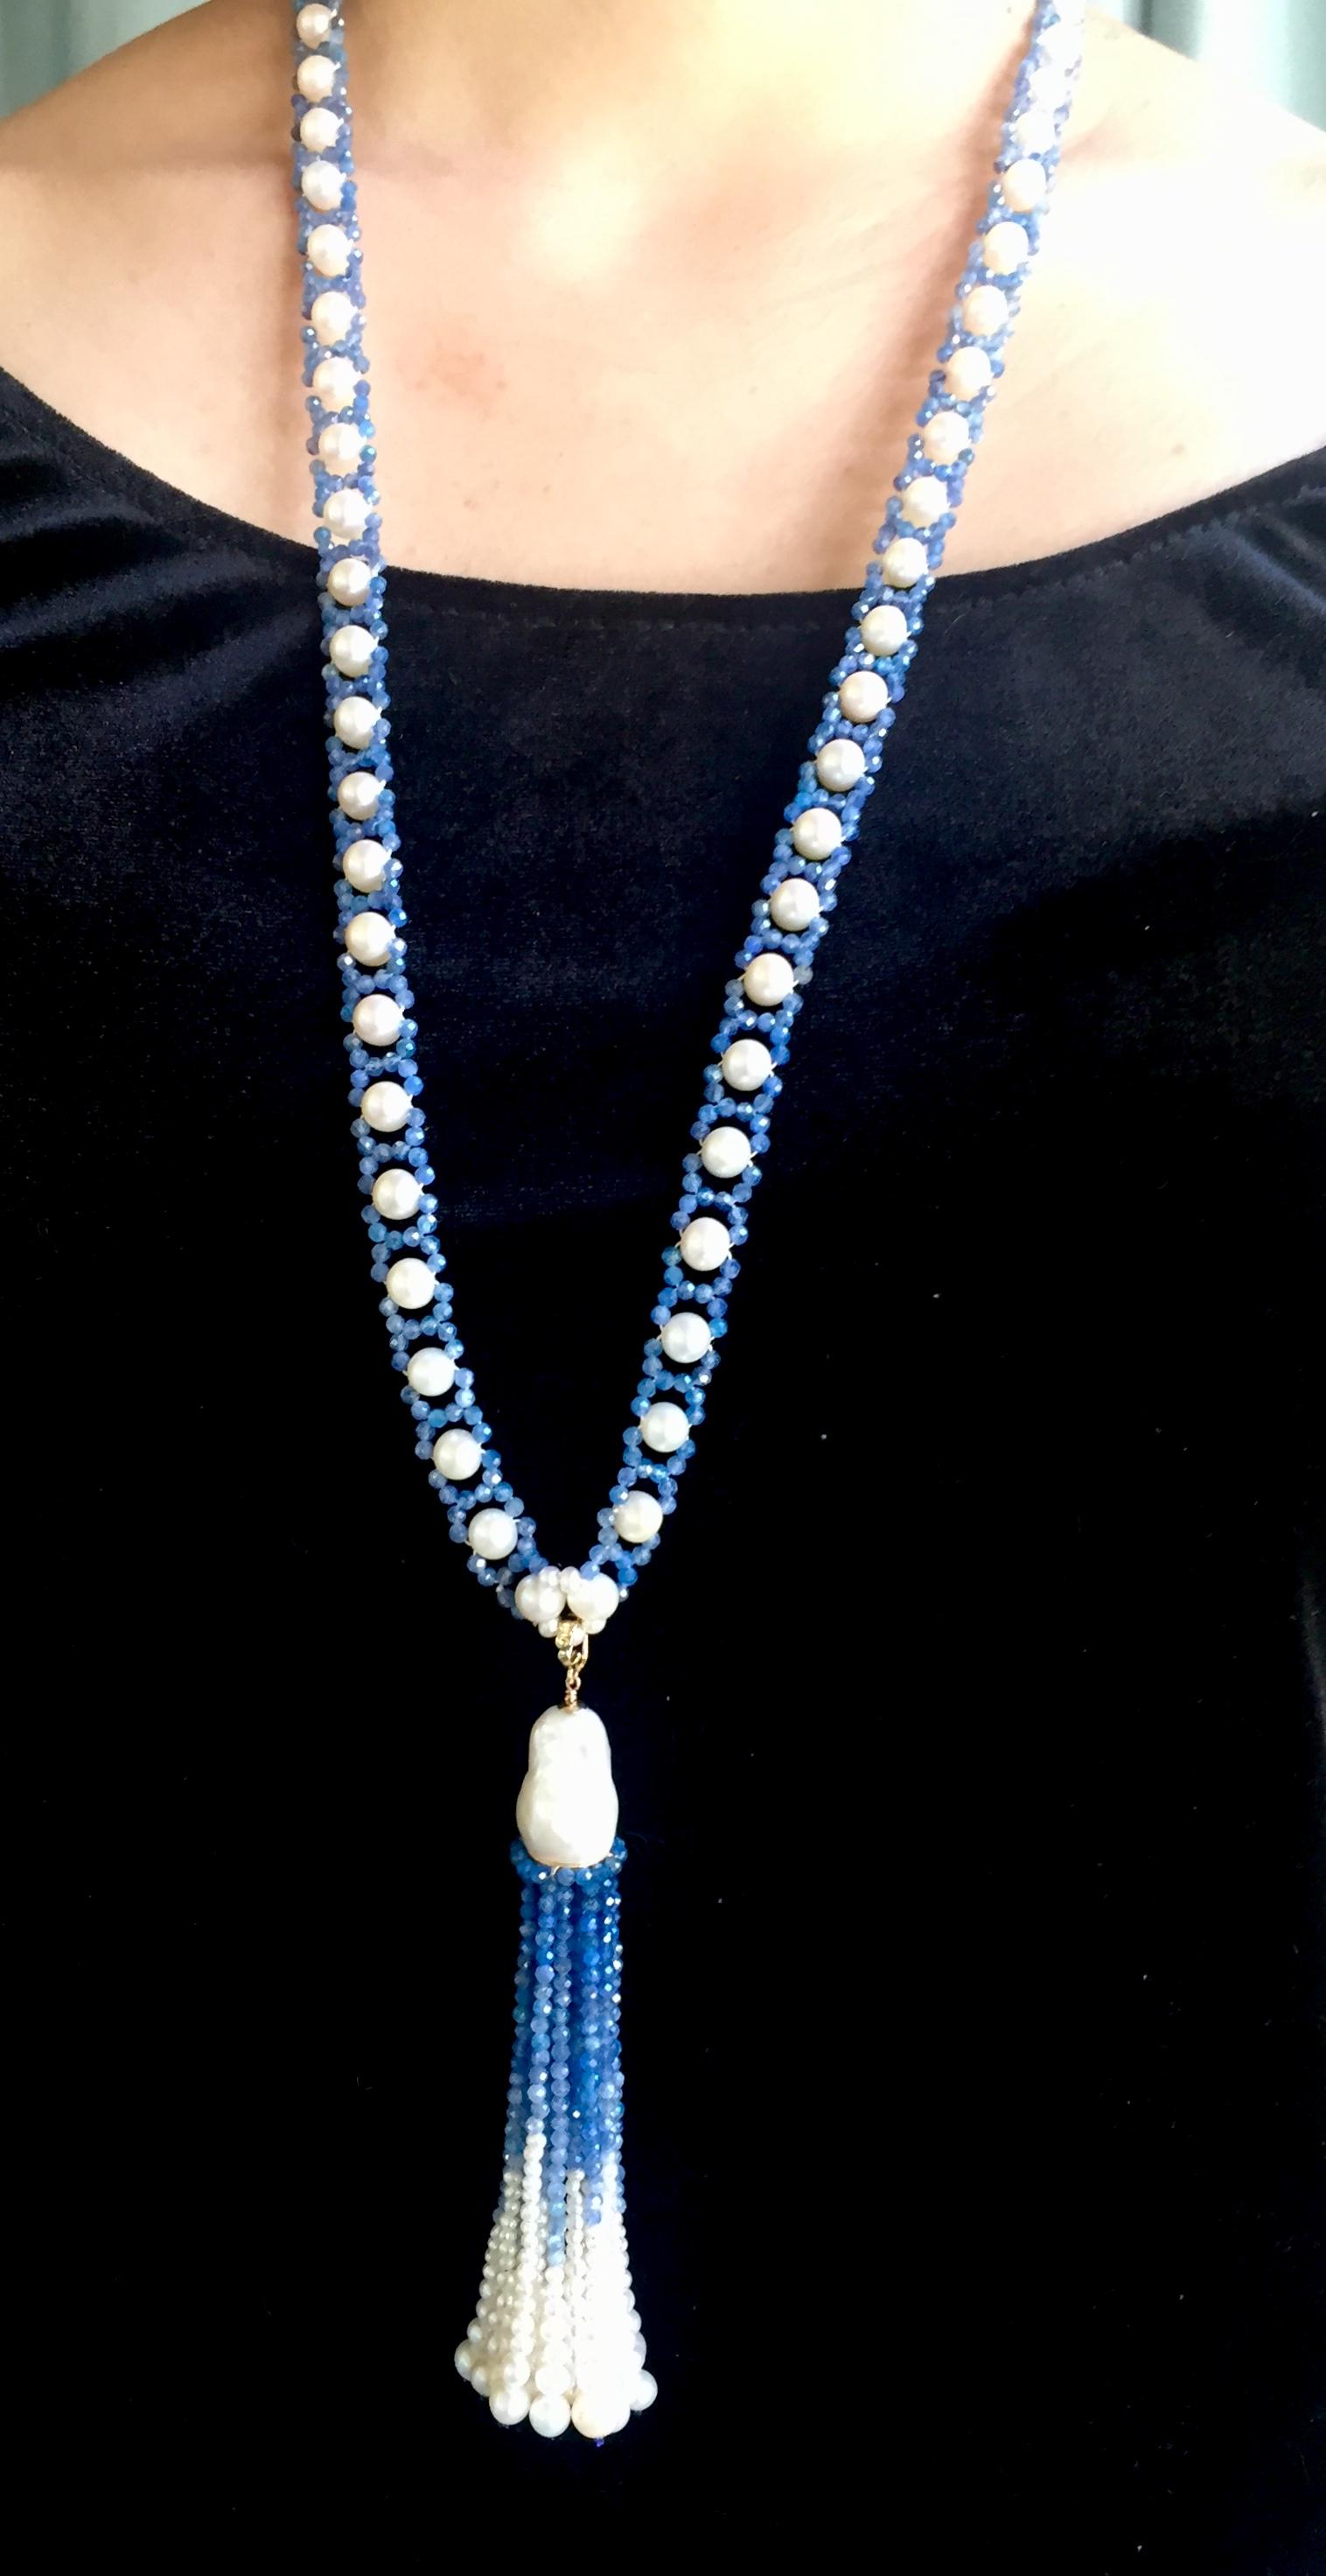 Women's Marina J White Pearl and Kyanite Sautoir Necklace with Tassel and 14 K Gold Clip